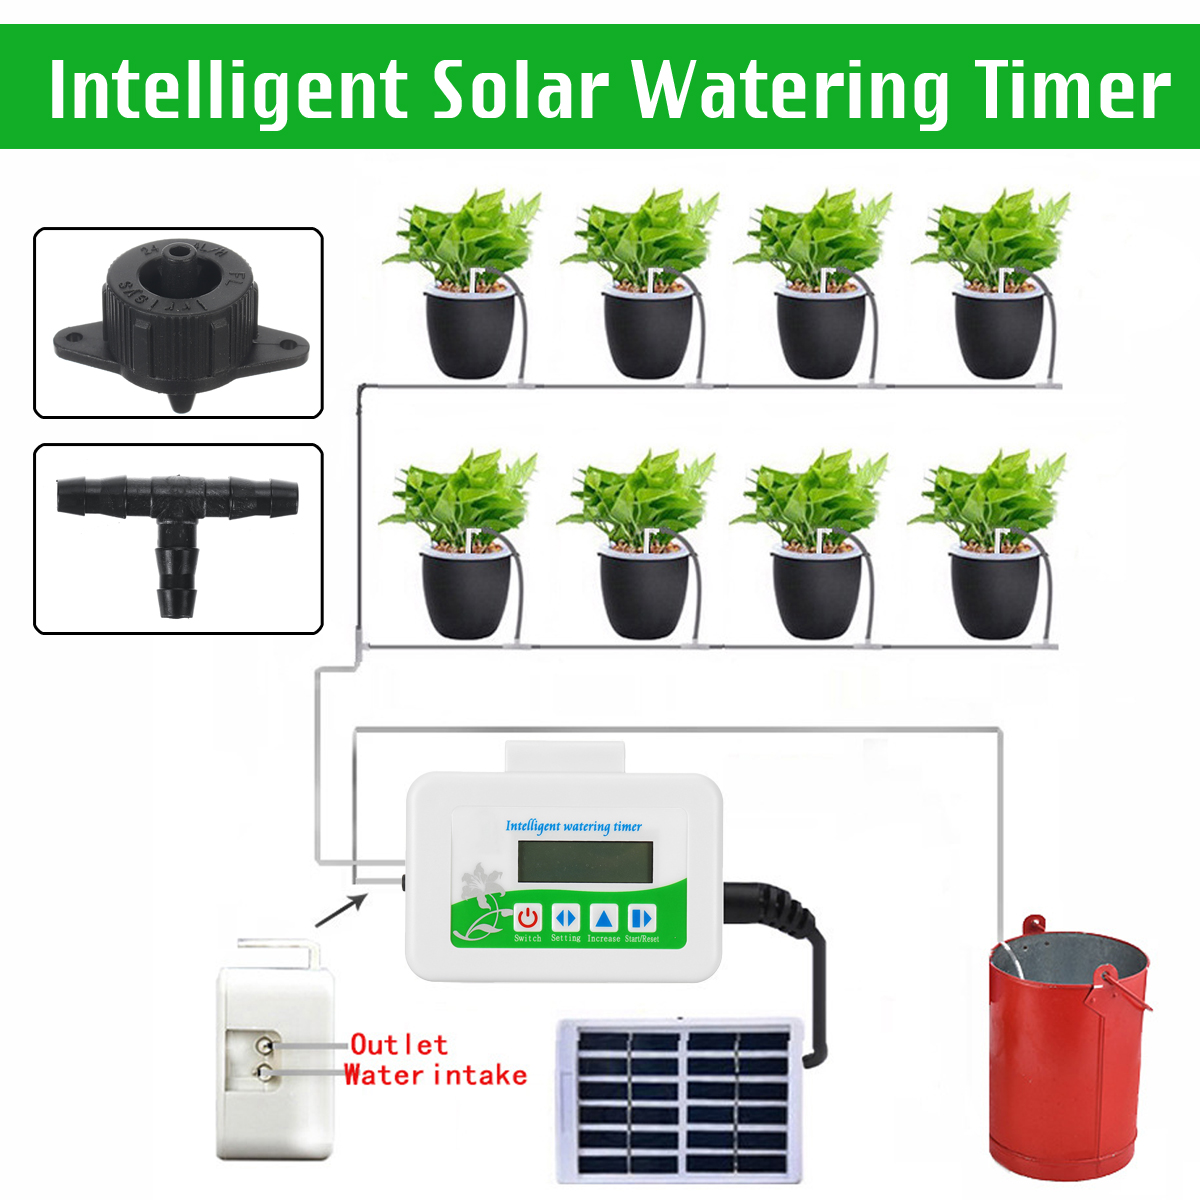 Intelligent-Watering-Timer-Automatic-Solar-Water-Controlle-Irrigation-System-Kit-1711287-2